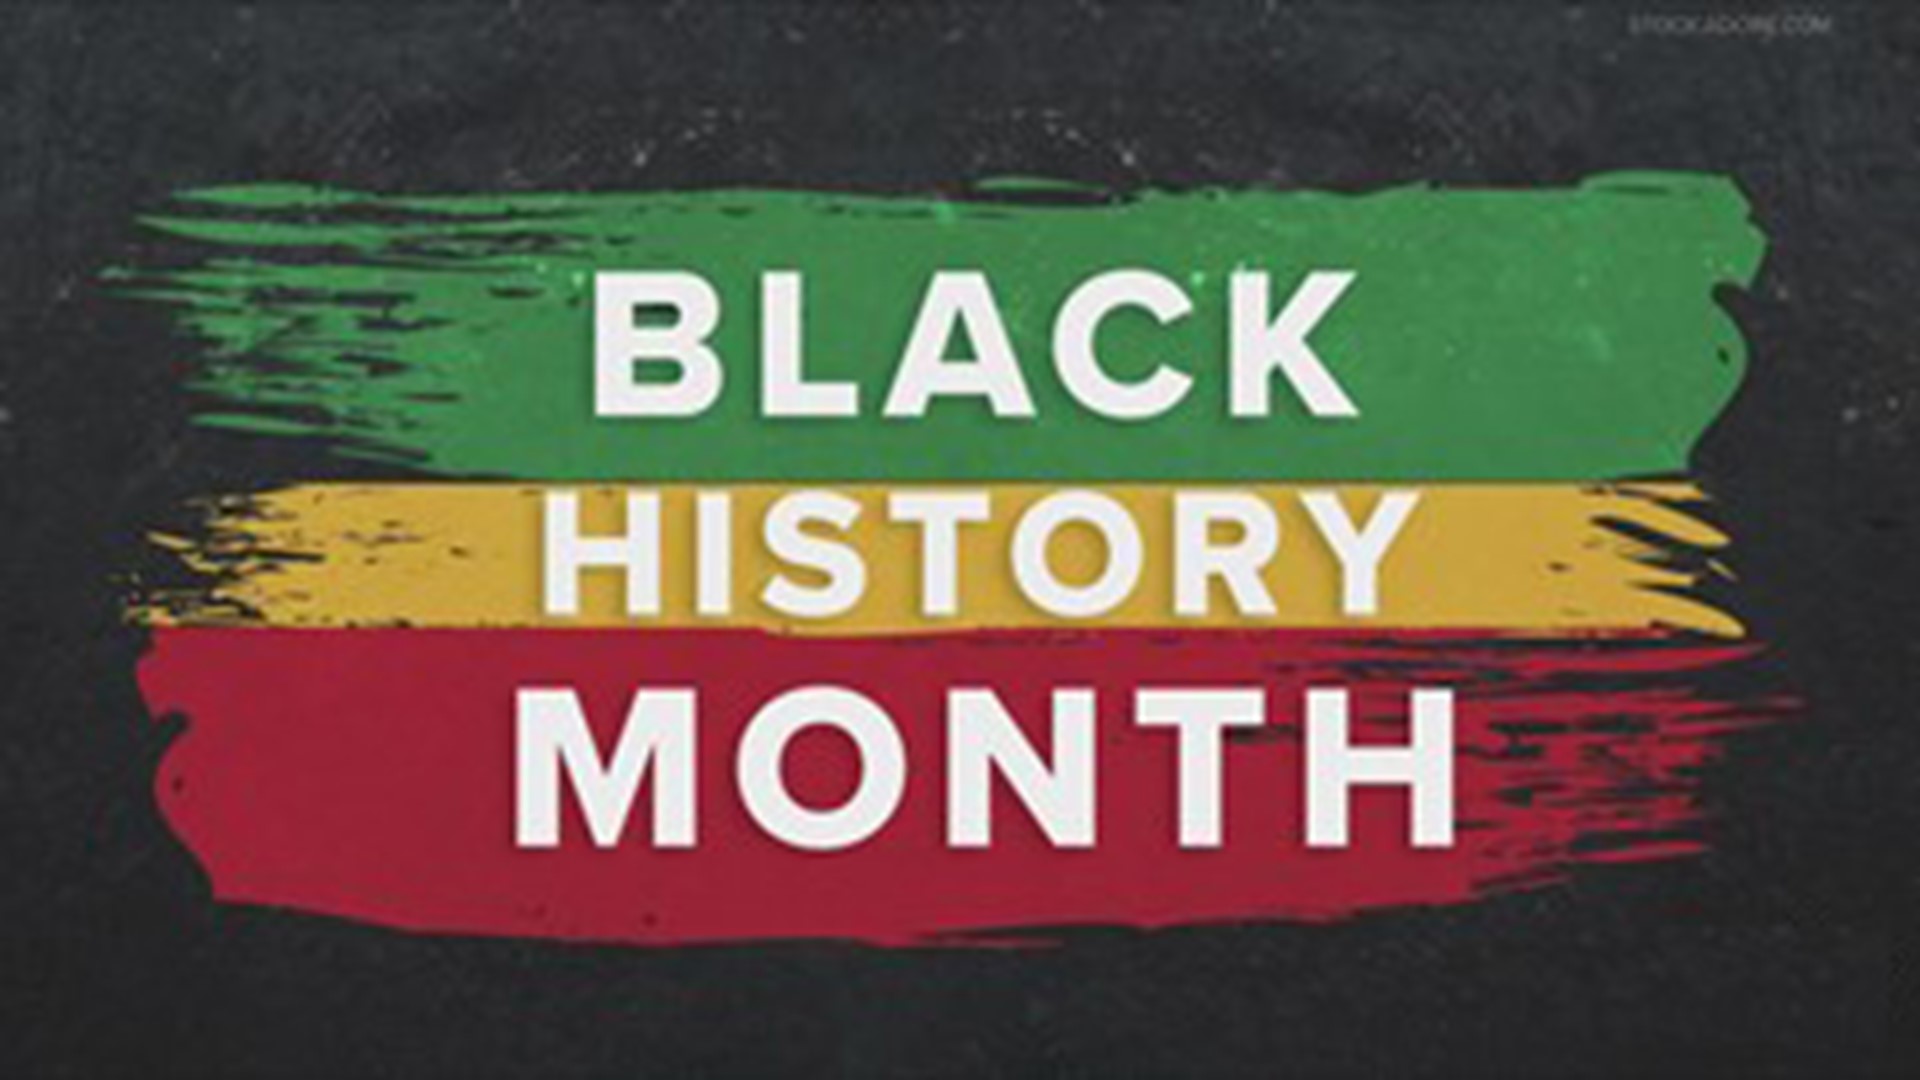 Black History Month: What happened in 1909?